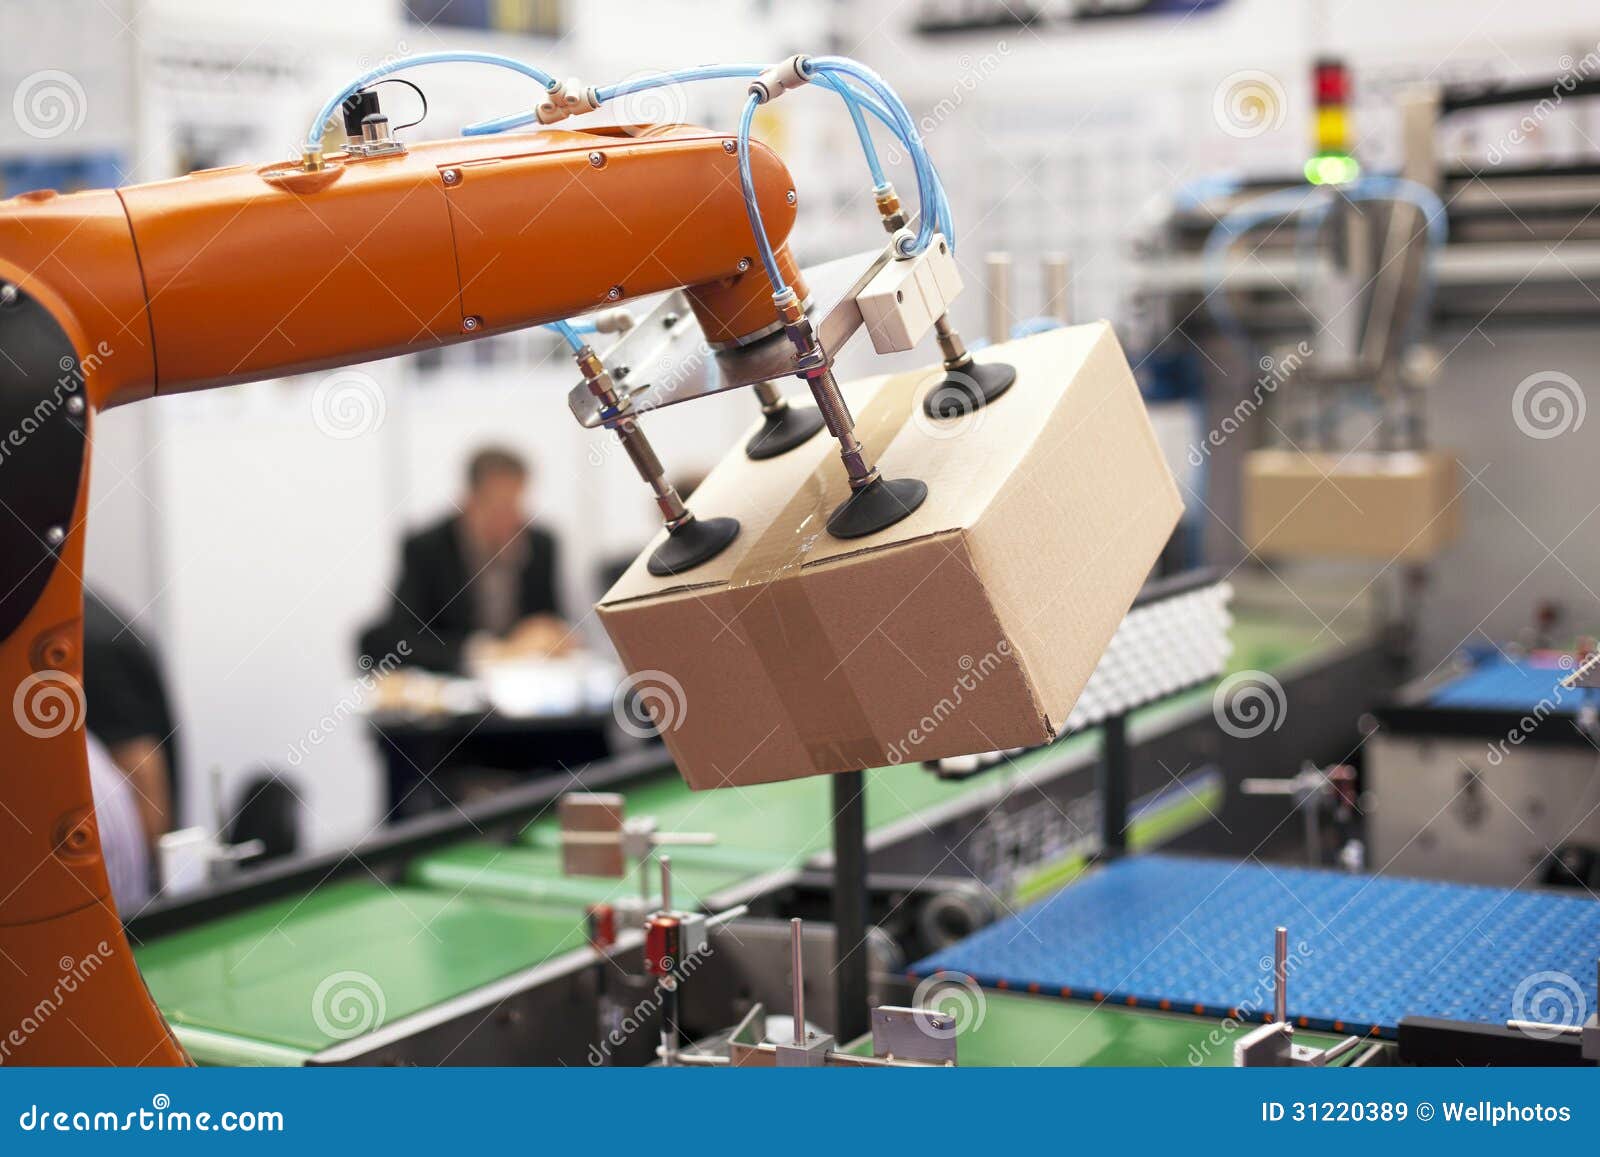 Robotic Arm For Packing Royalty Free Stock Images - Image ...